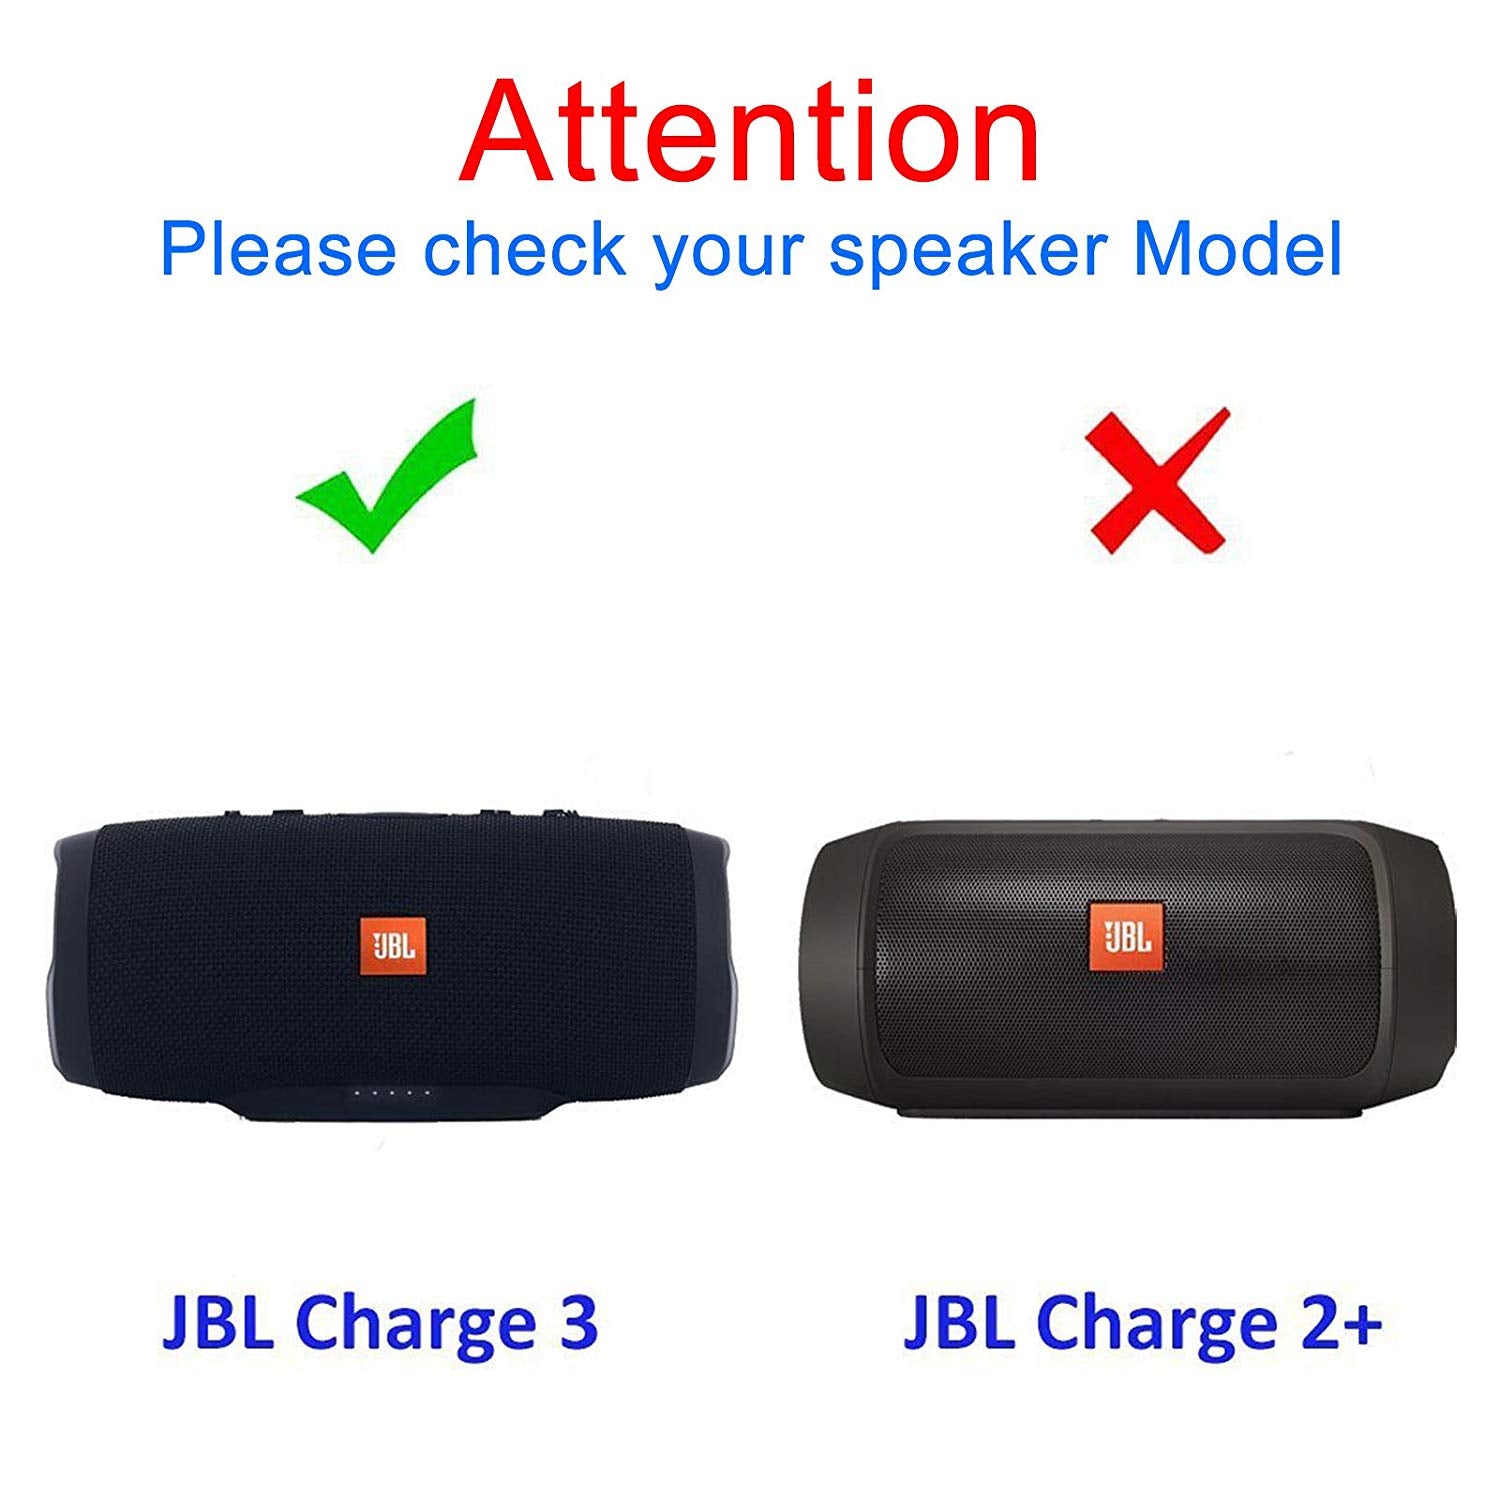 Eva Waterproof Hard Travel Carrying Case Storage Bag For Jbl Charge 3 Bluetooth Wireless Speaker Fit Usb Cable And Charge - ebowsos